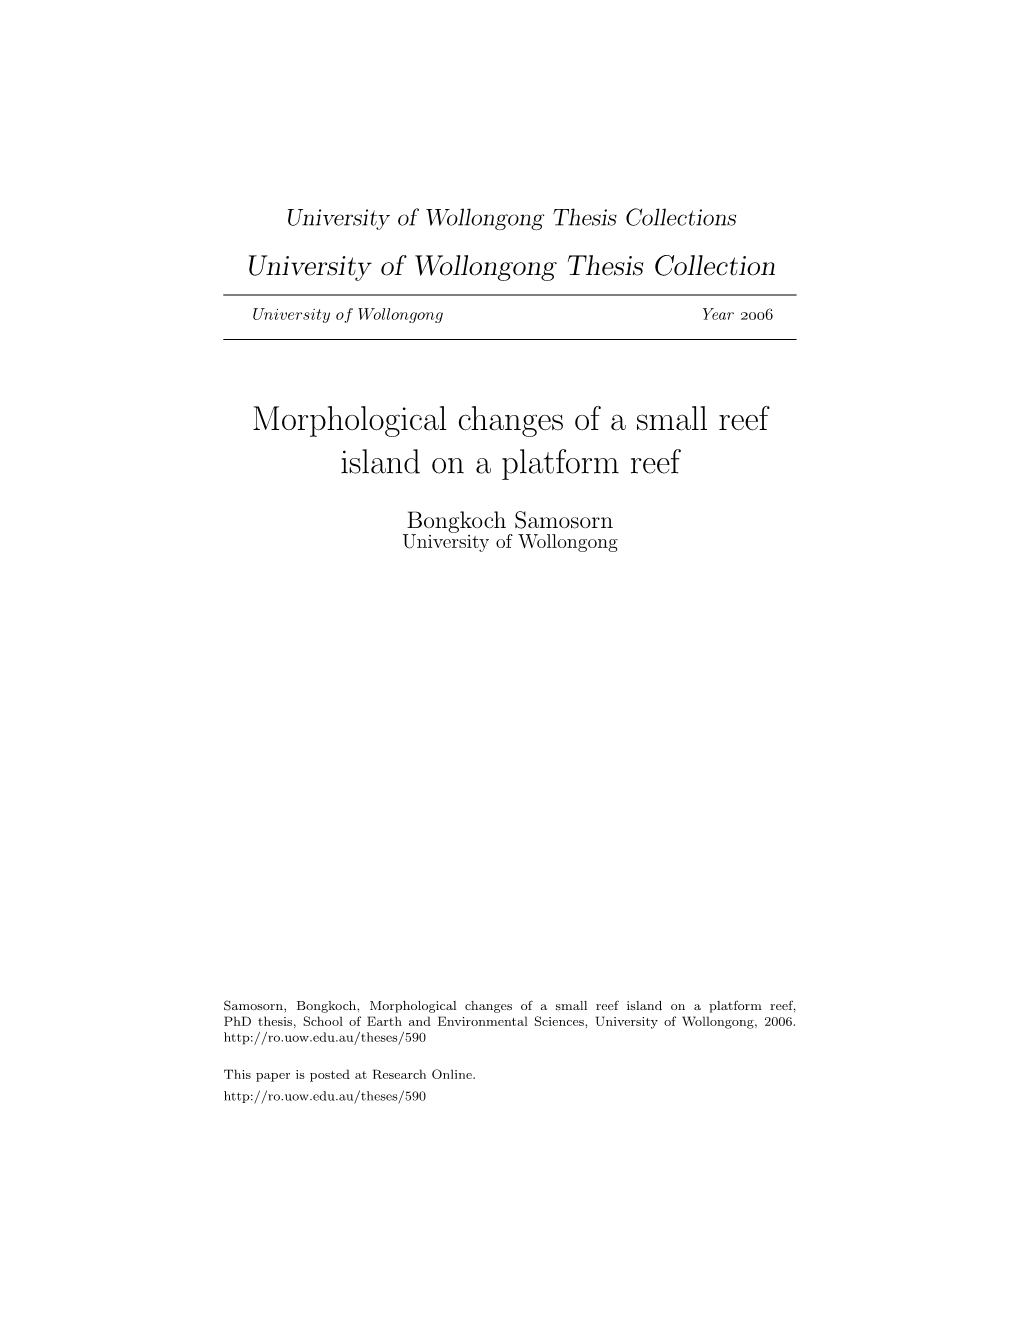 Morphological Changes of a Small Reef Island on a Platform Reef